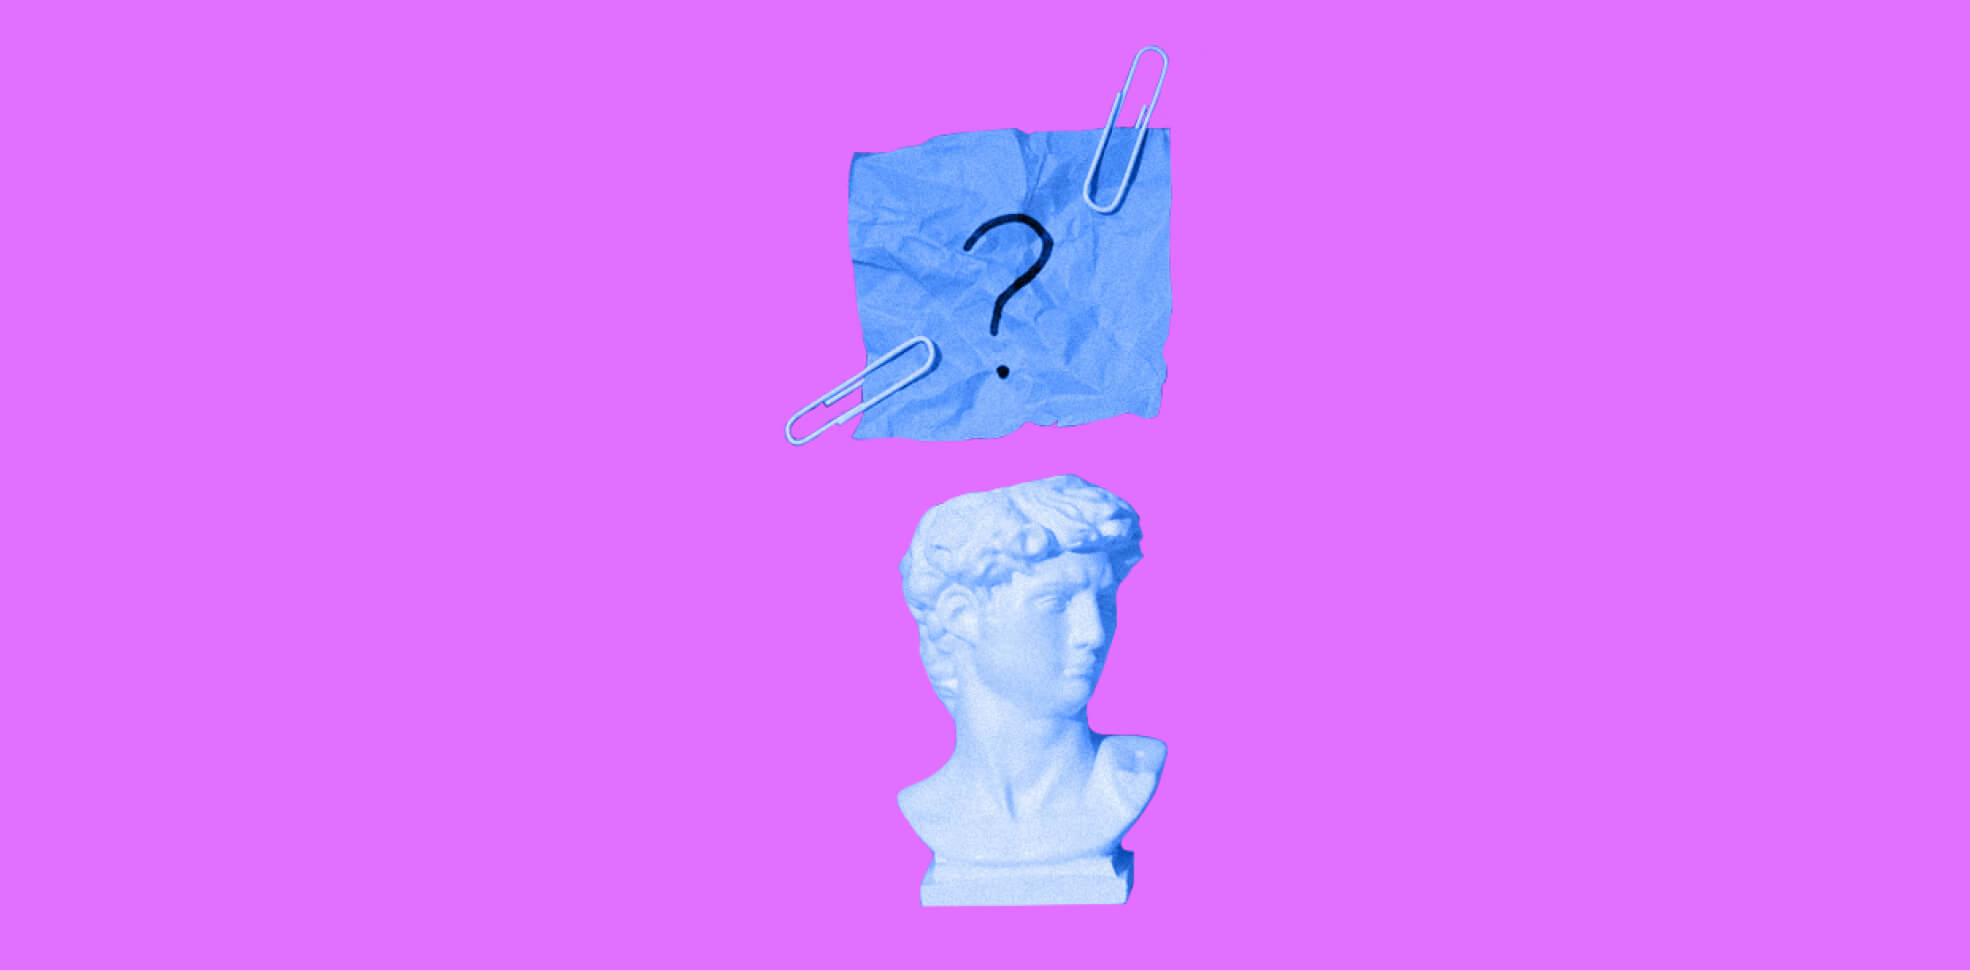 question mark on a piece of paper and a statue on the purple background